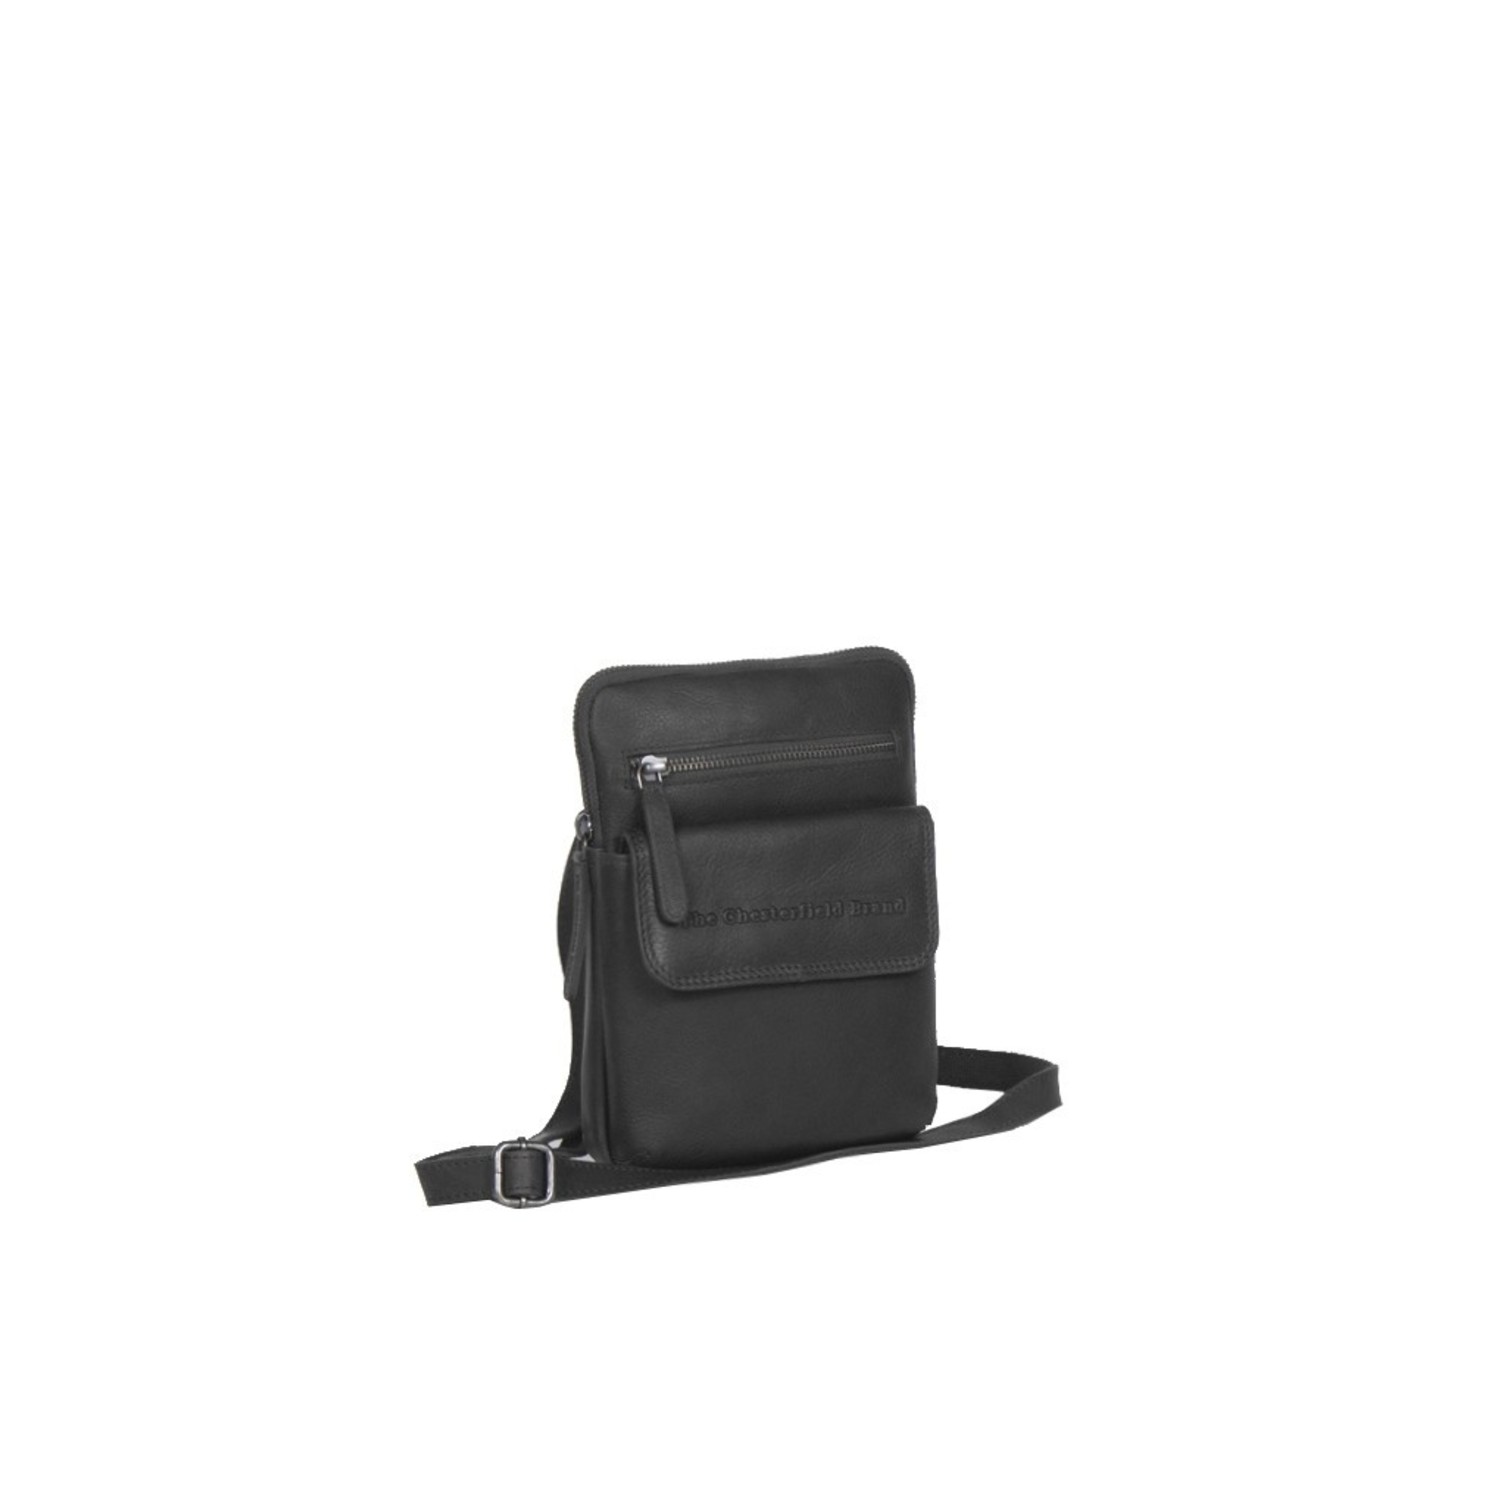 Men's Leather Bags  The Chesterfield Brand - The Chesterfield Brand